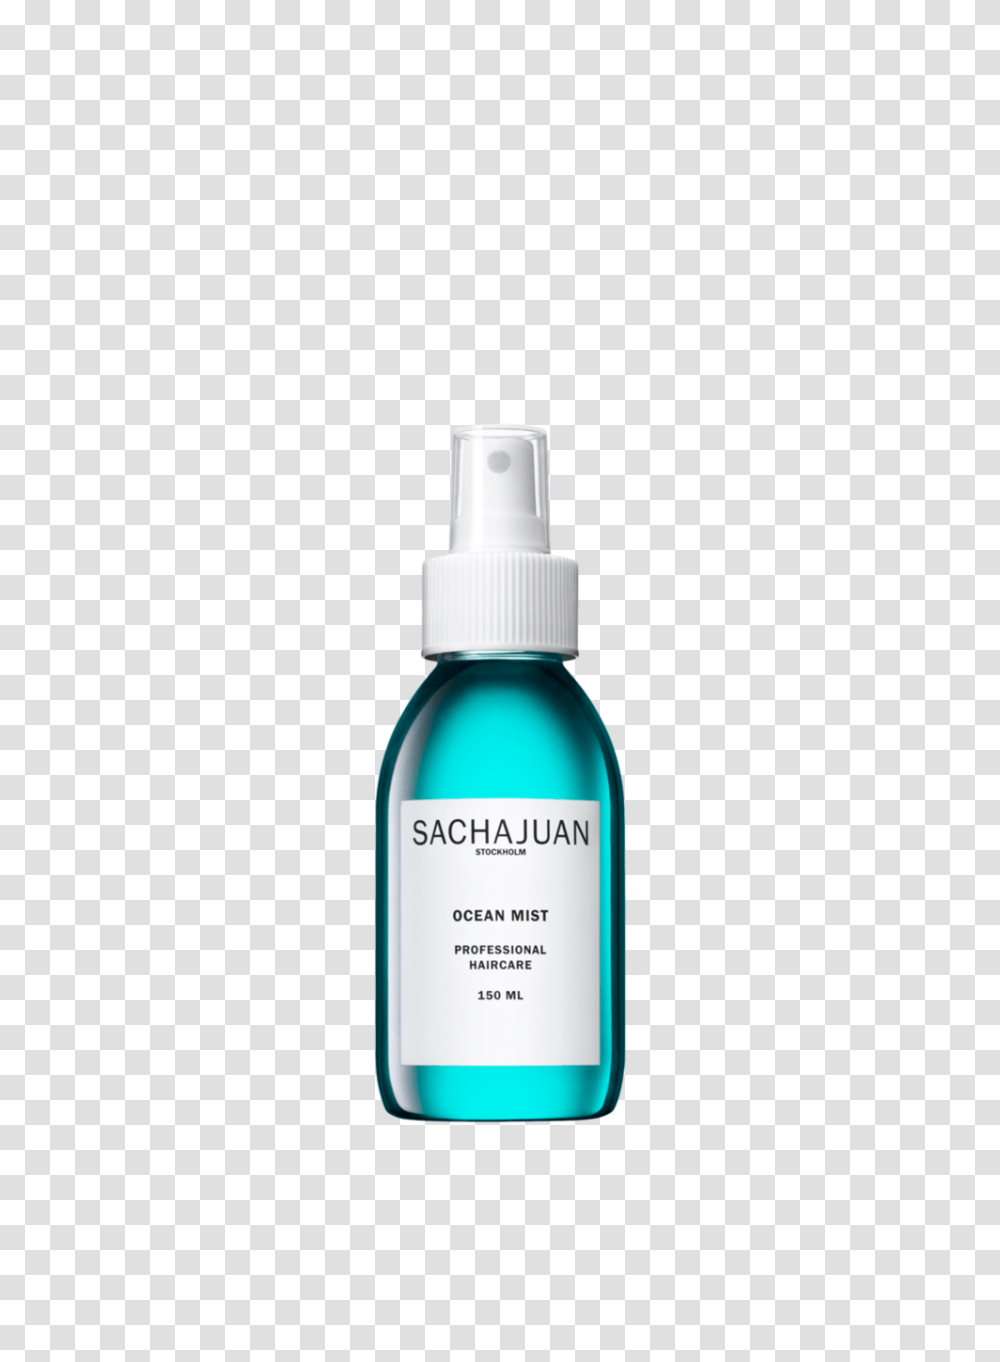 Ocean Mist Thp Haircutters Thp Haircutters, Bottle, Cosmetics, Tin, Can Transparent Png